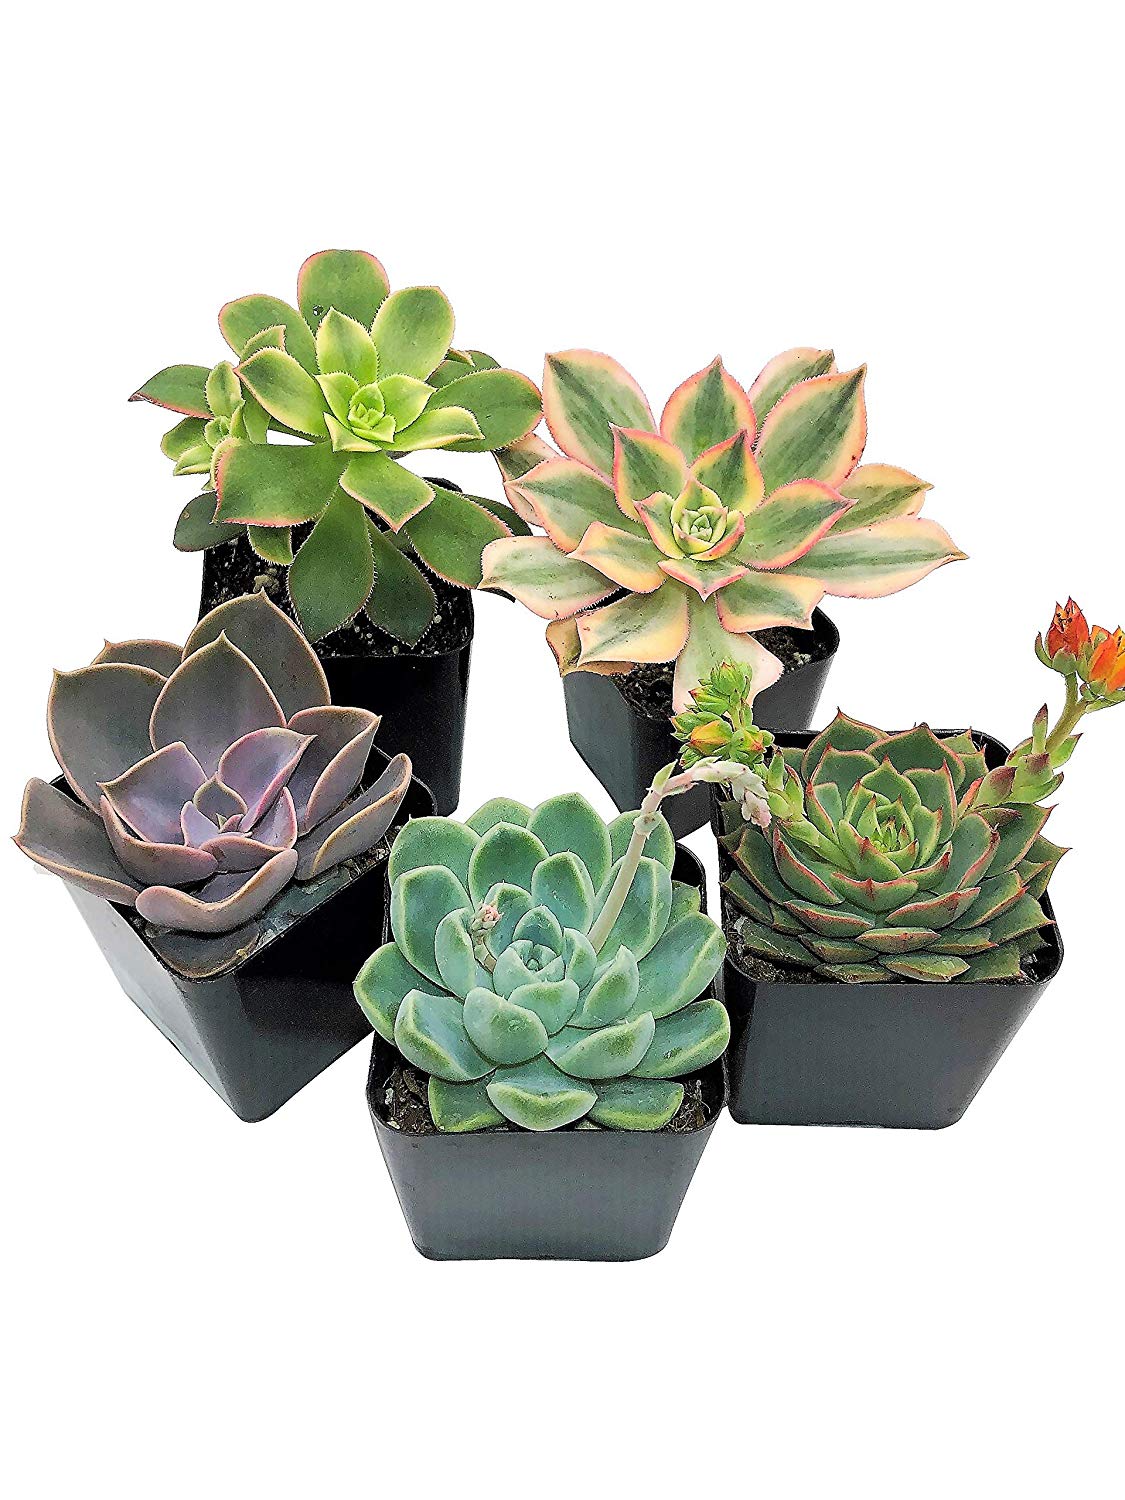 Small Succulents are great for college dorm rooms!